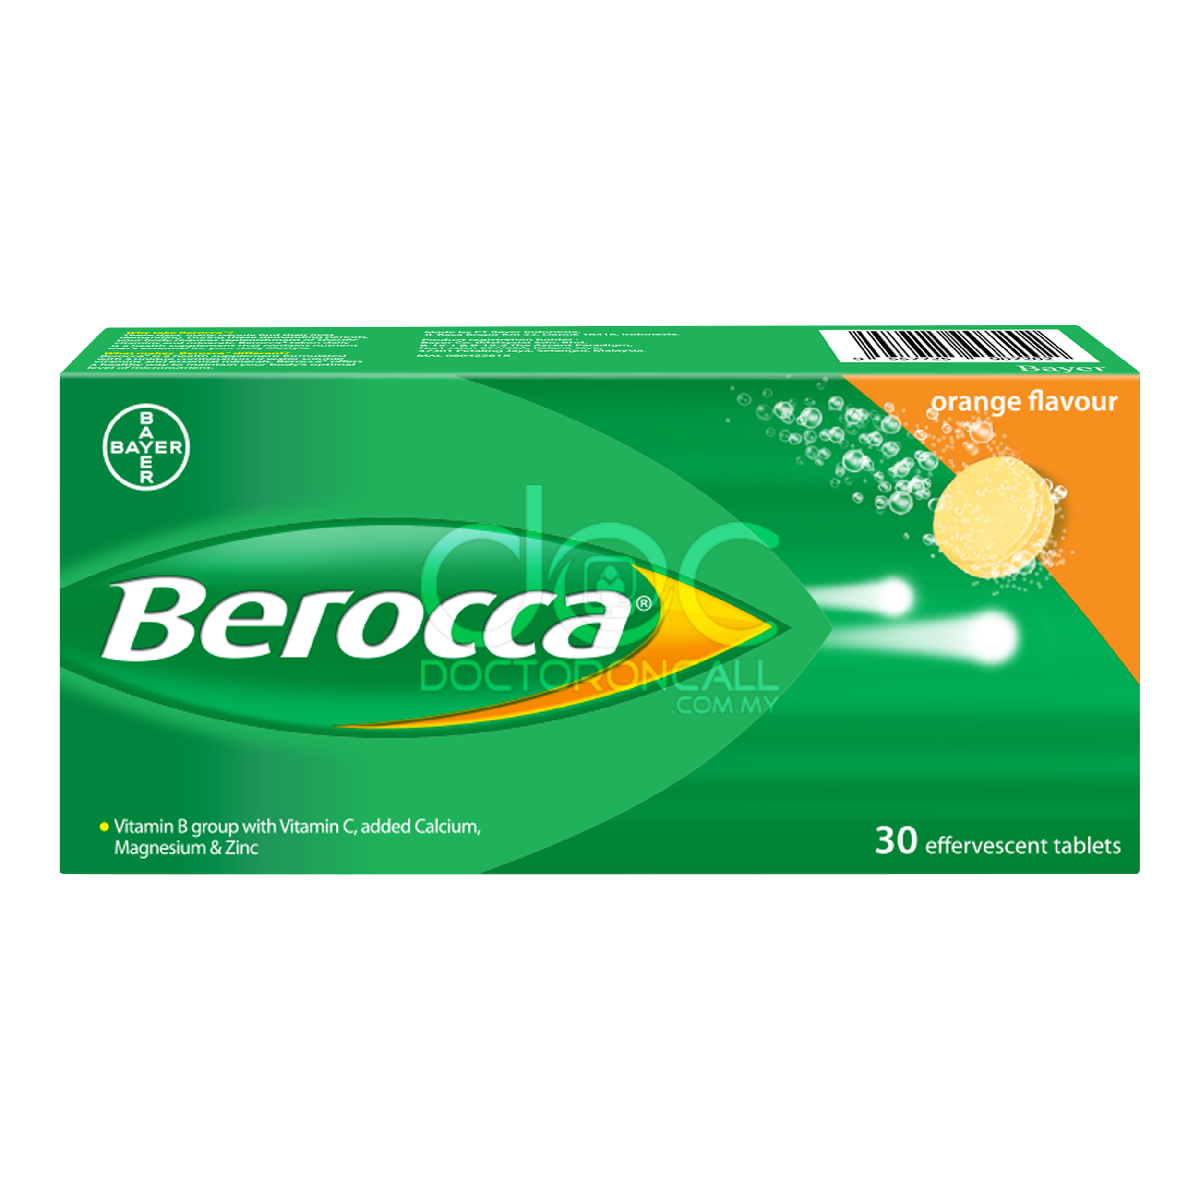 Contents of the vitamin/mineral tablets Berocca Boost and Berocca